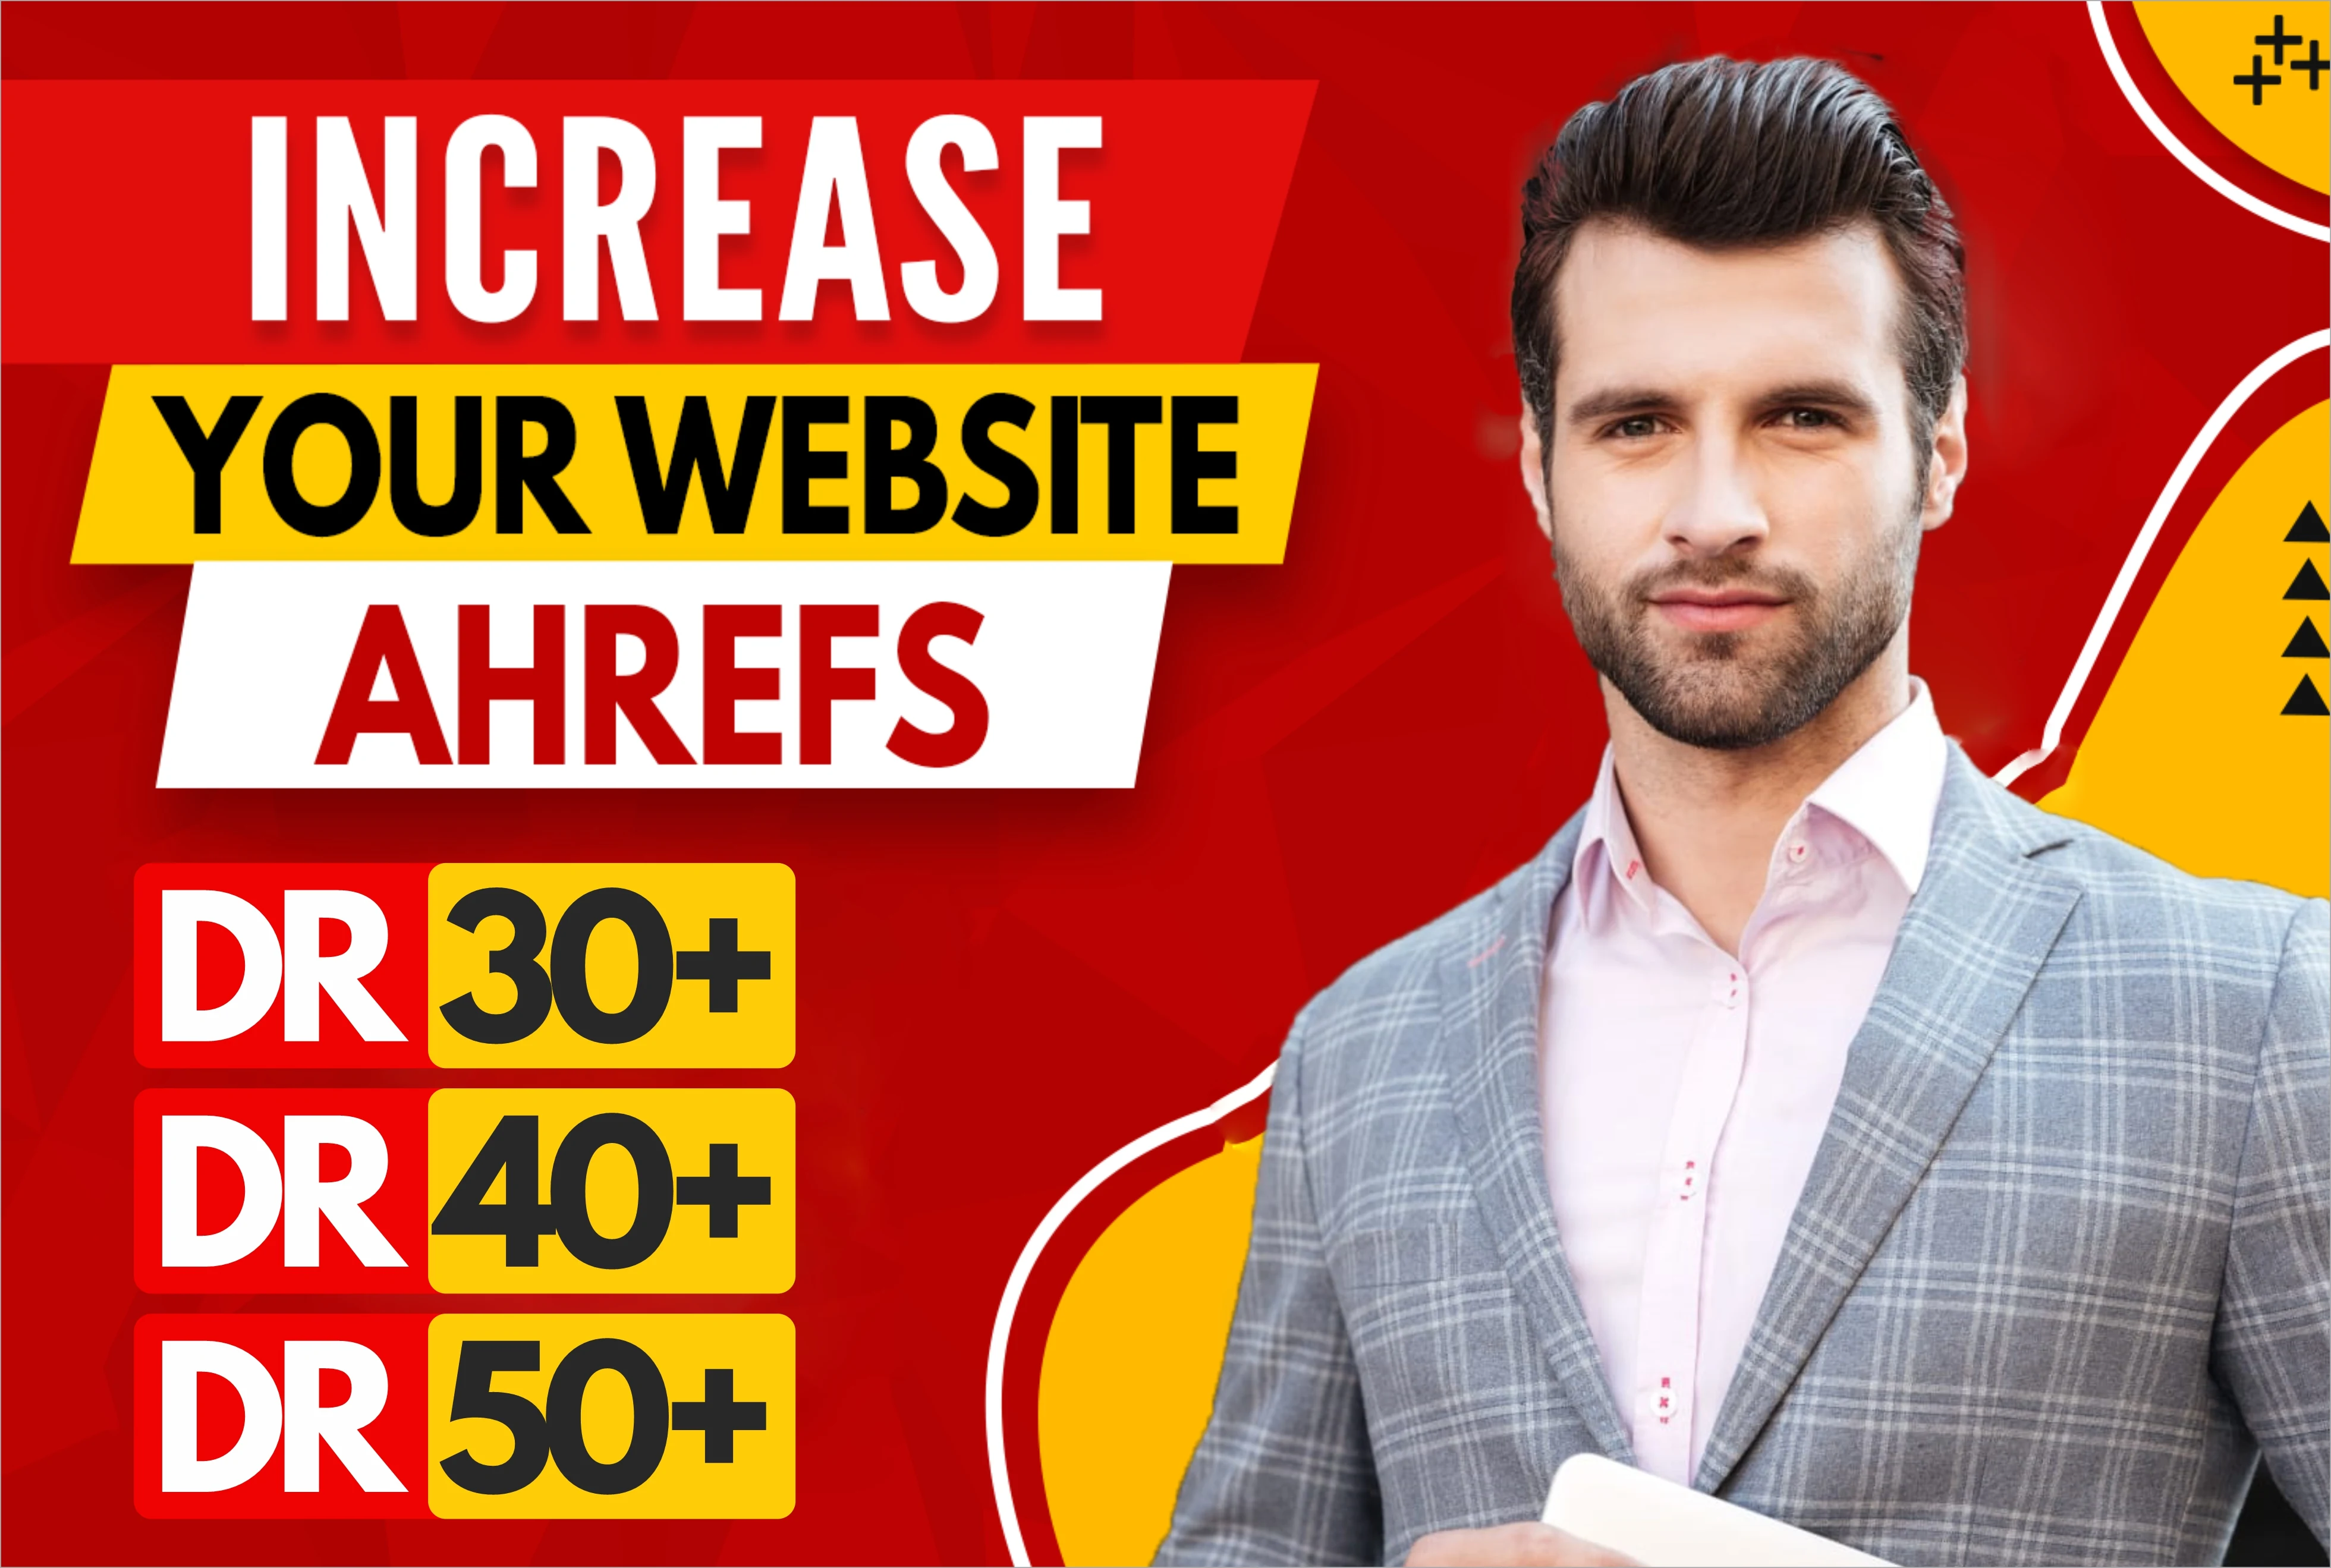 Increase your website DR 50 Plus in AHREFs. Buy 2 get 1 free Offer